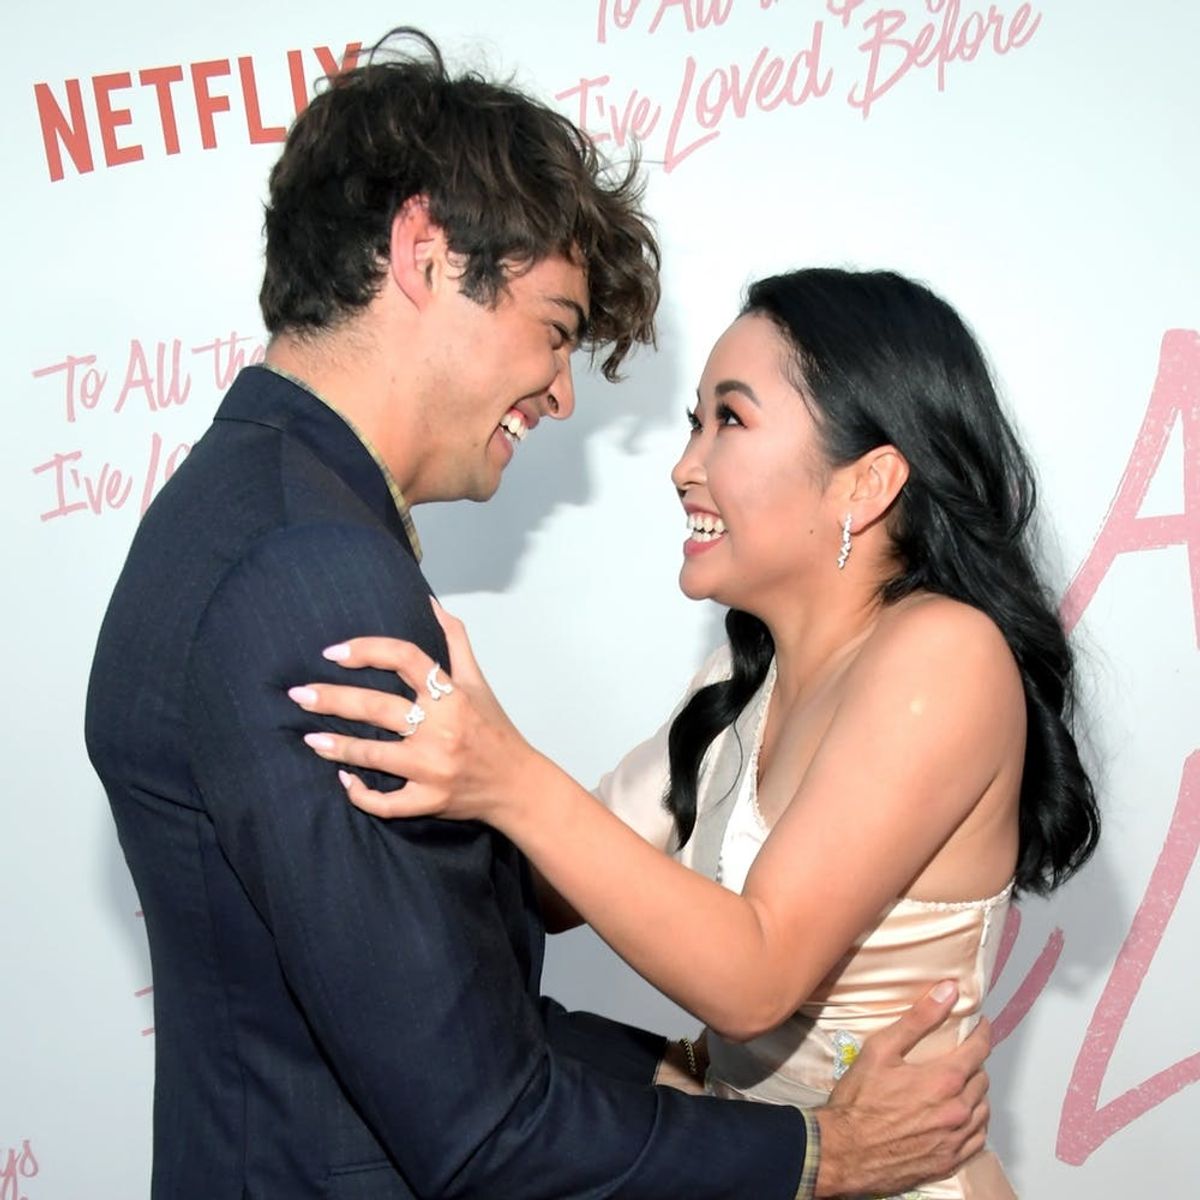 Lana Condor and Noah Centineo Just Confirmed the ‘To All the Boys I’ve Loved Before’ Sequel in an Adorable Video